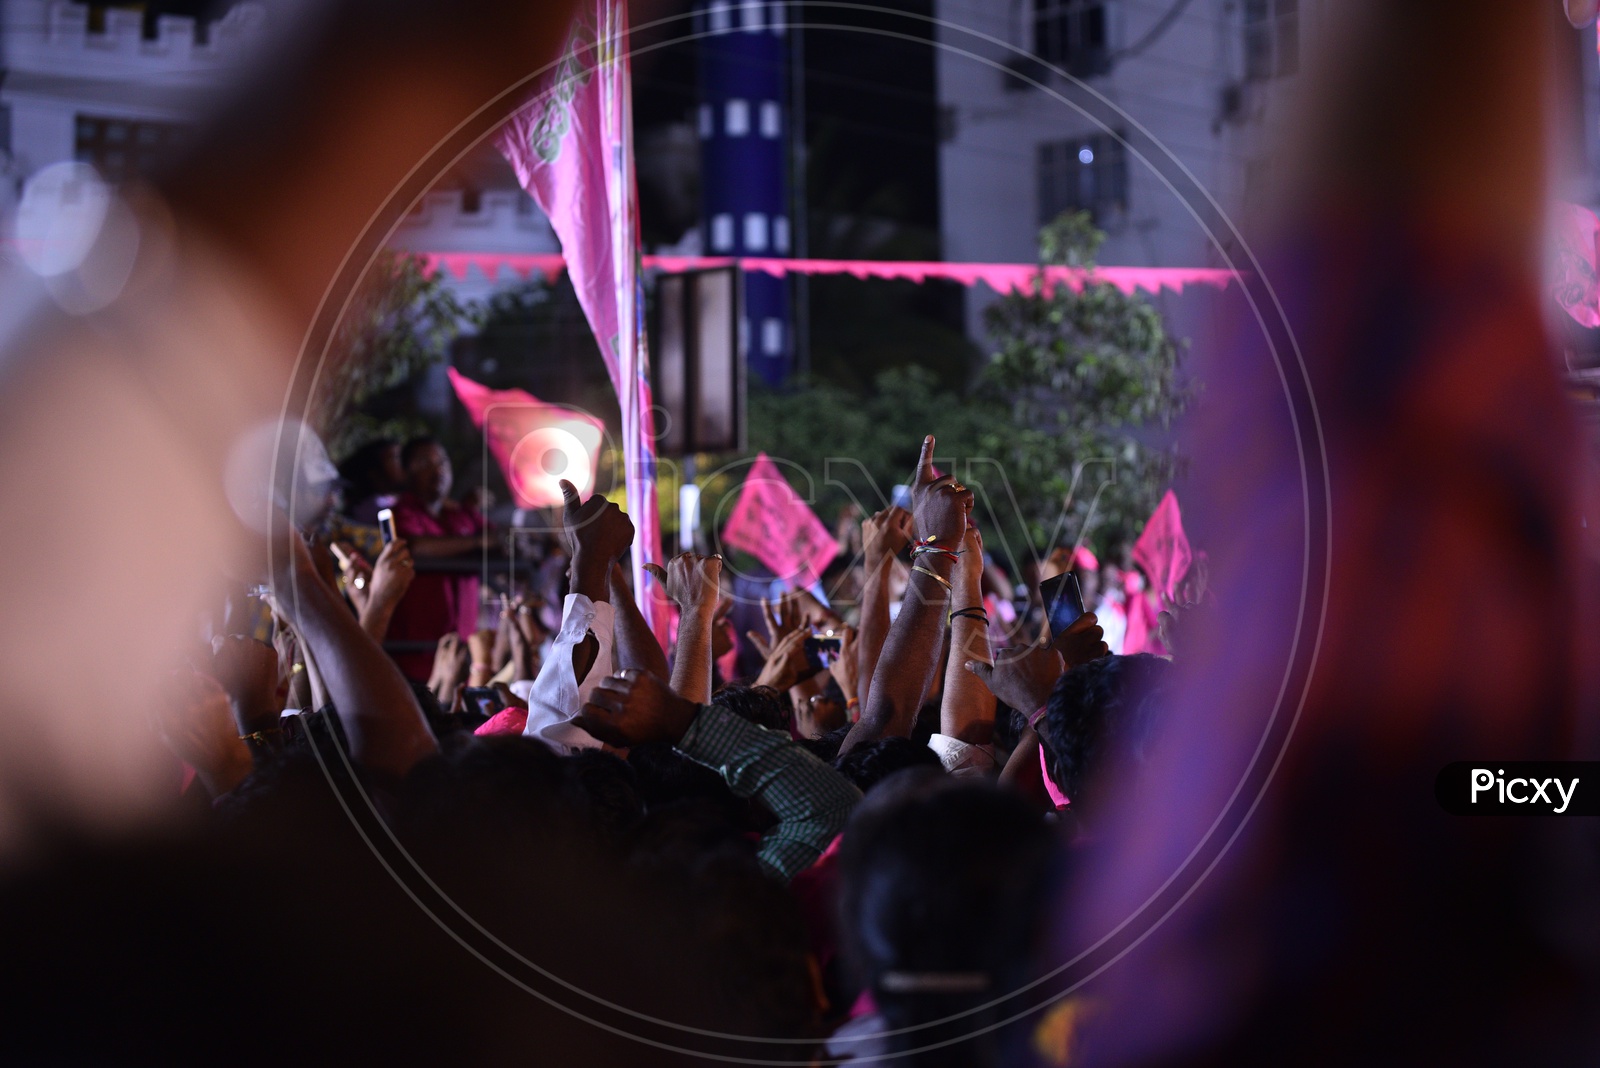 TRS Party Pepole Cheering The Gathering by Waving TRS Party Flags During The Election Campaign Rally 2018